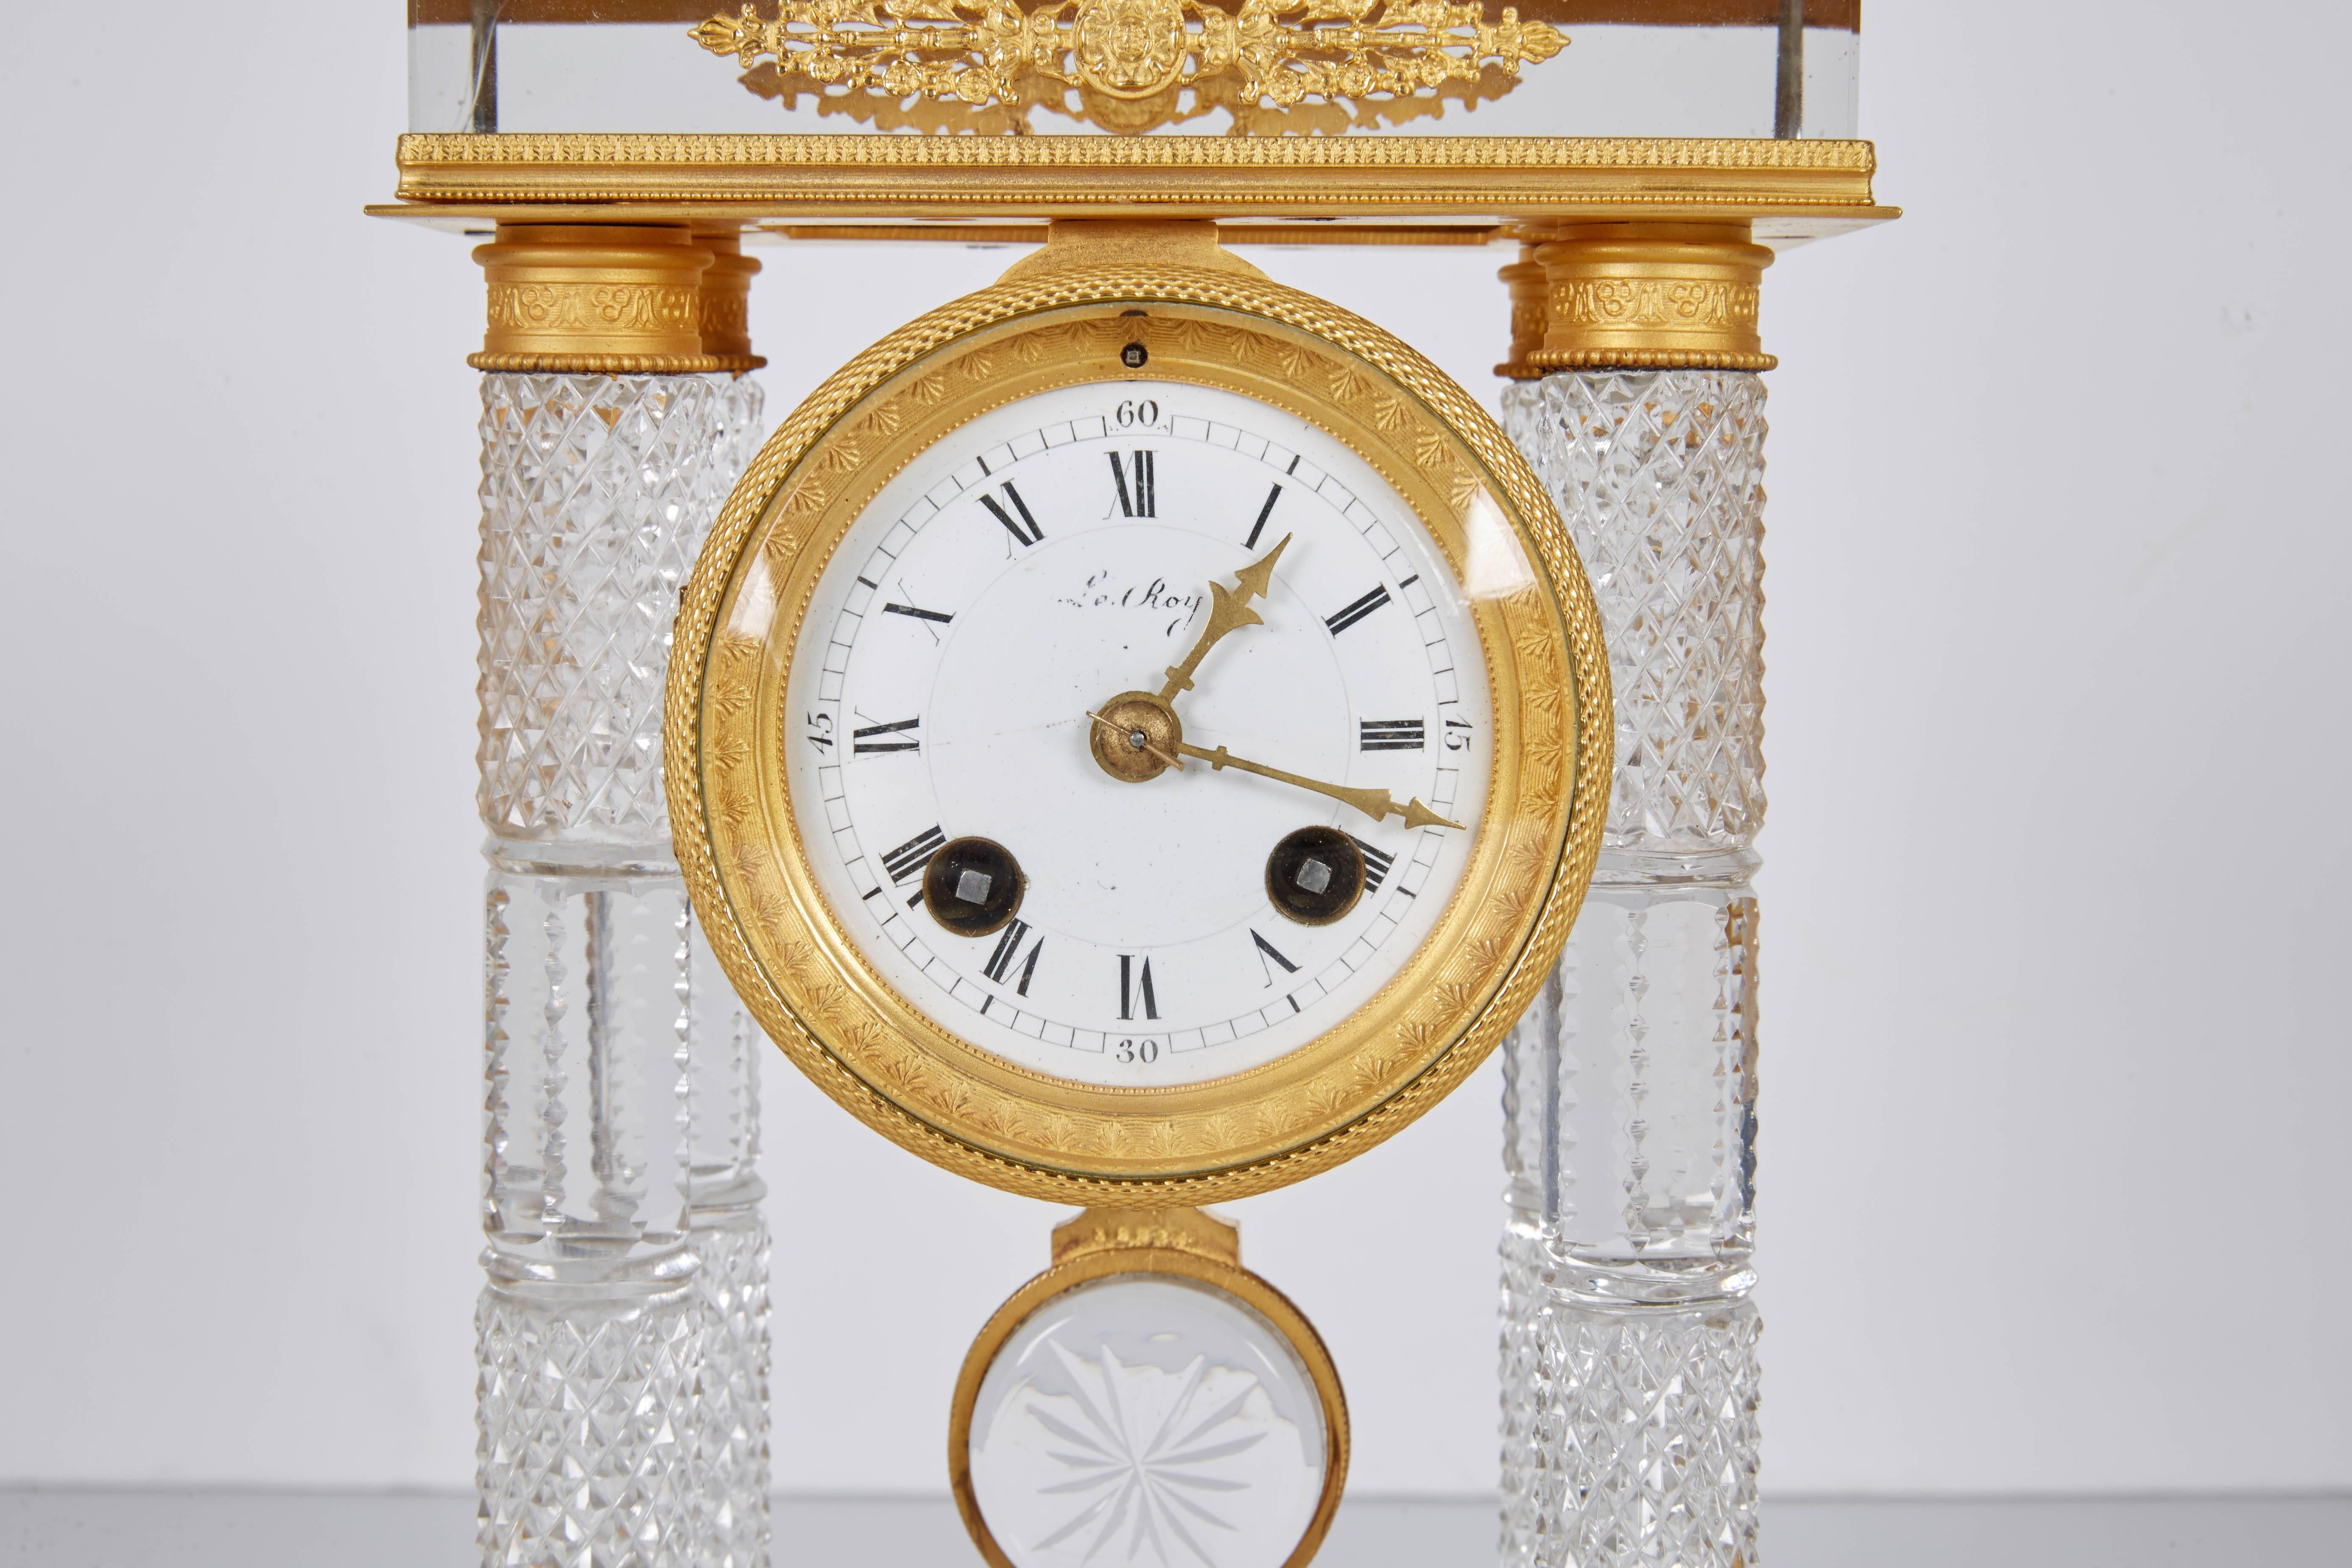 An exquisite French gilt bronze and crystal glass clock set garniture, attributed to Cristalleries De Baccarat.

A clock and a pair of candlesticks. 
Three pieces total.

19th century.

Very exquisite detail to the bronze mounts. Glass